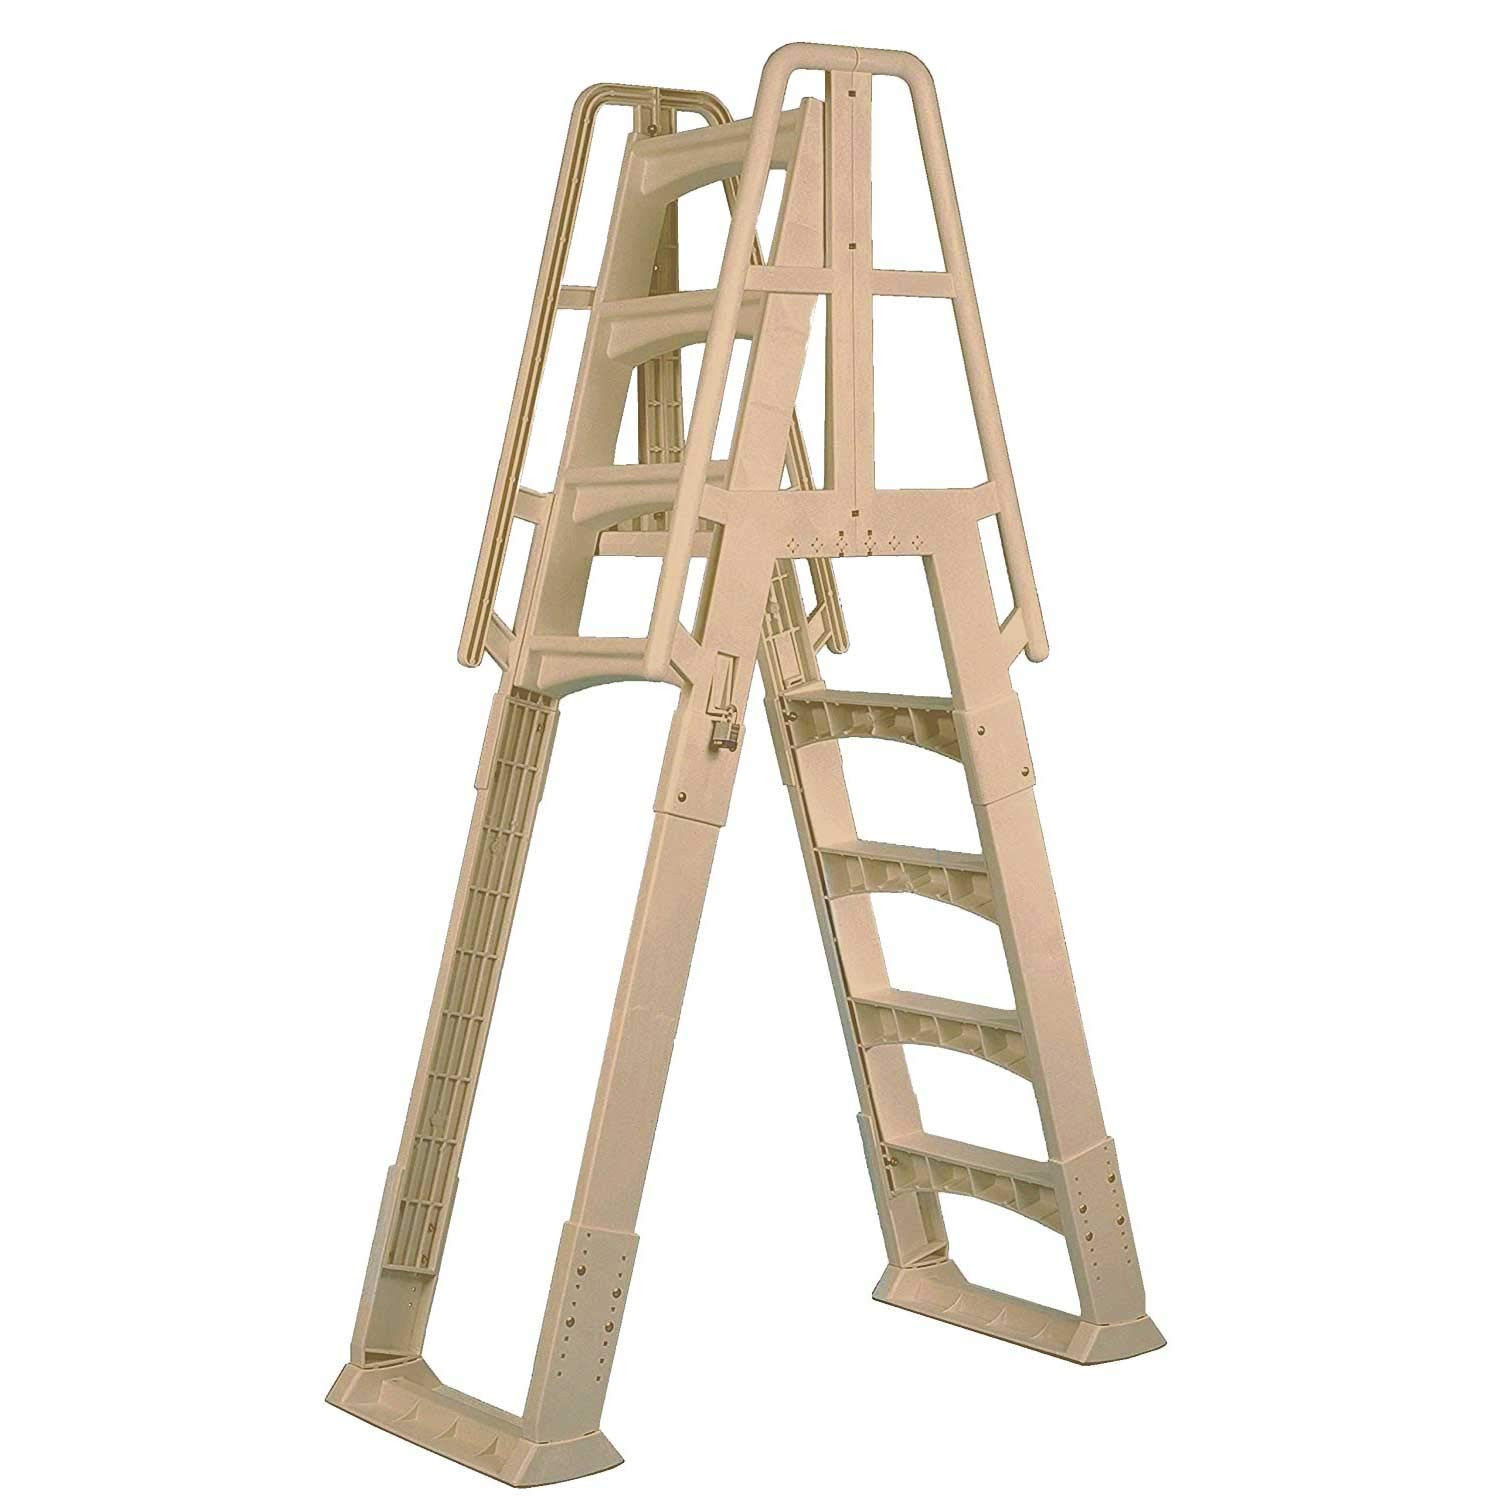 Pool Ladders Above Ground
 Best Ground Pool Ladders and Staircases Reviews 2019